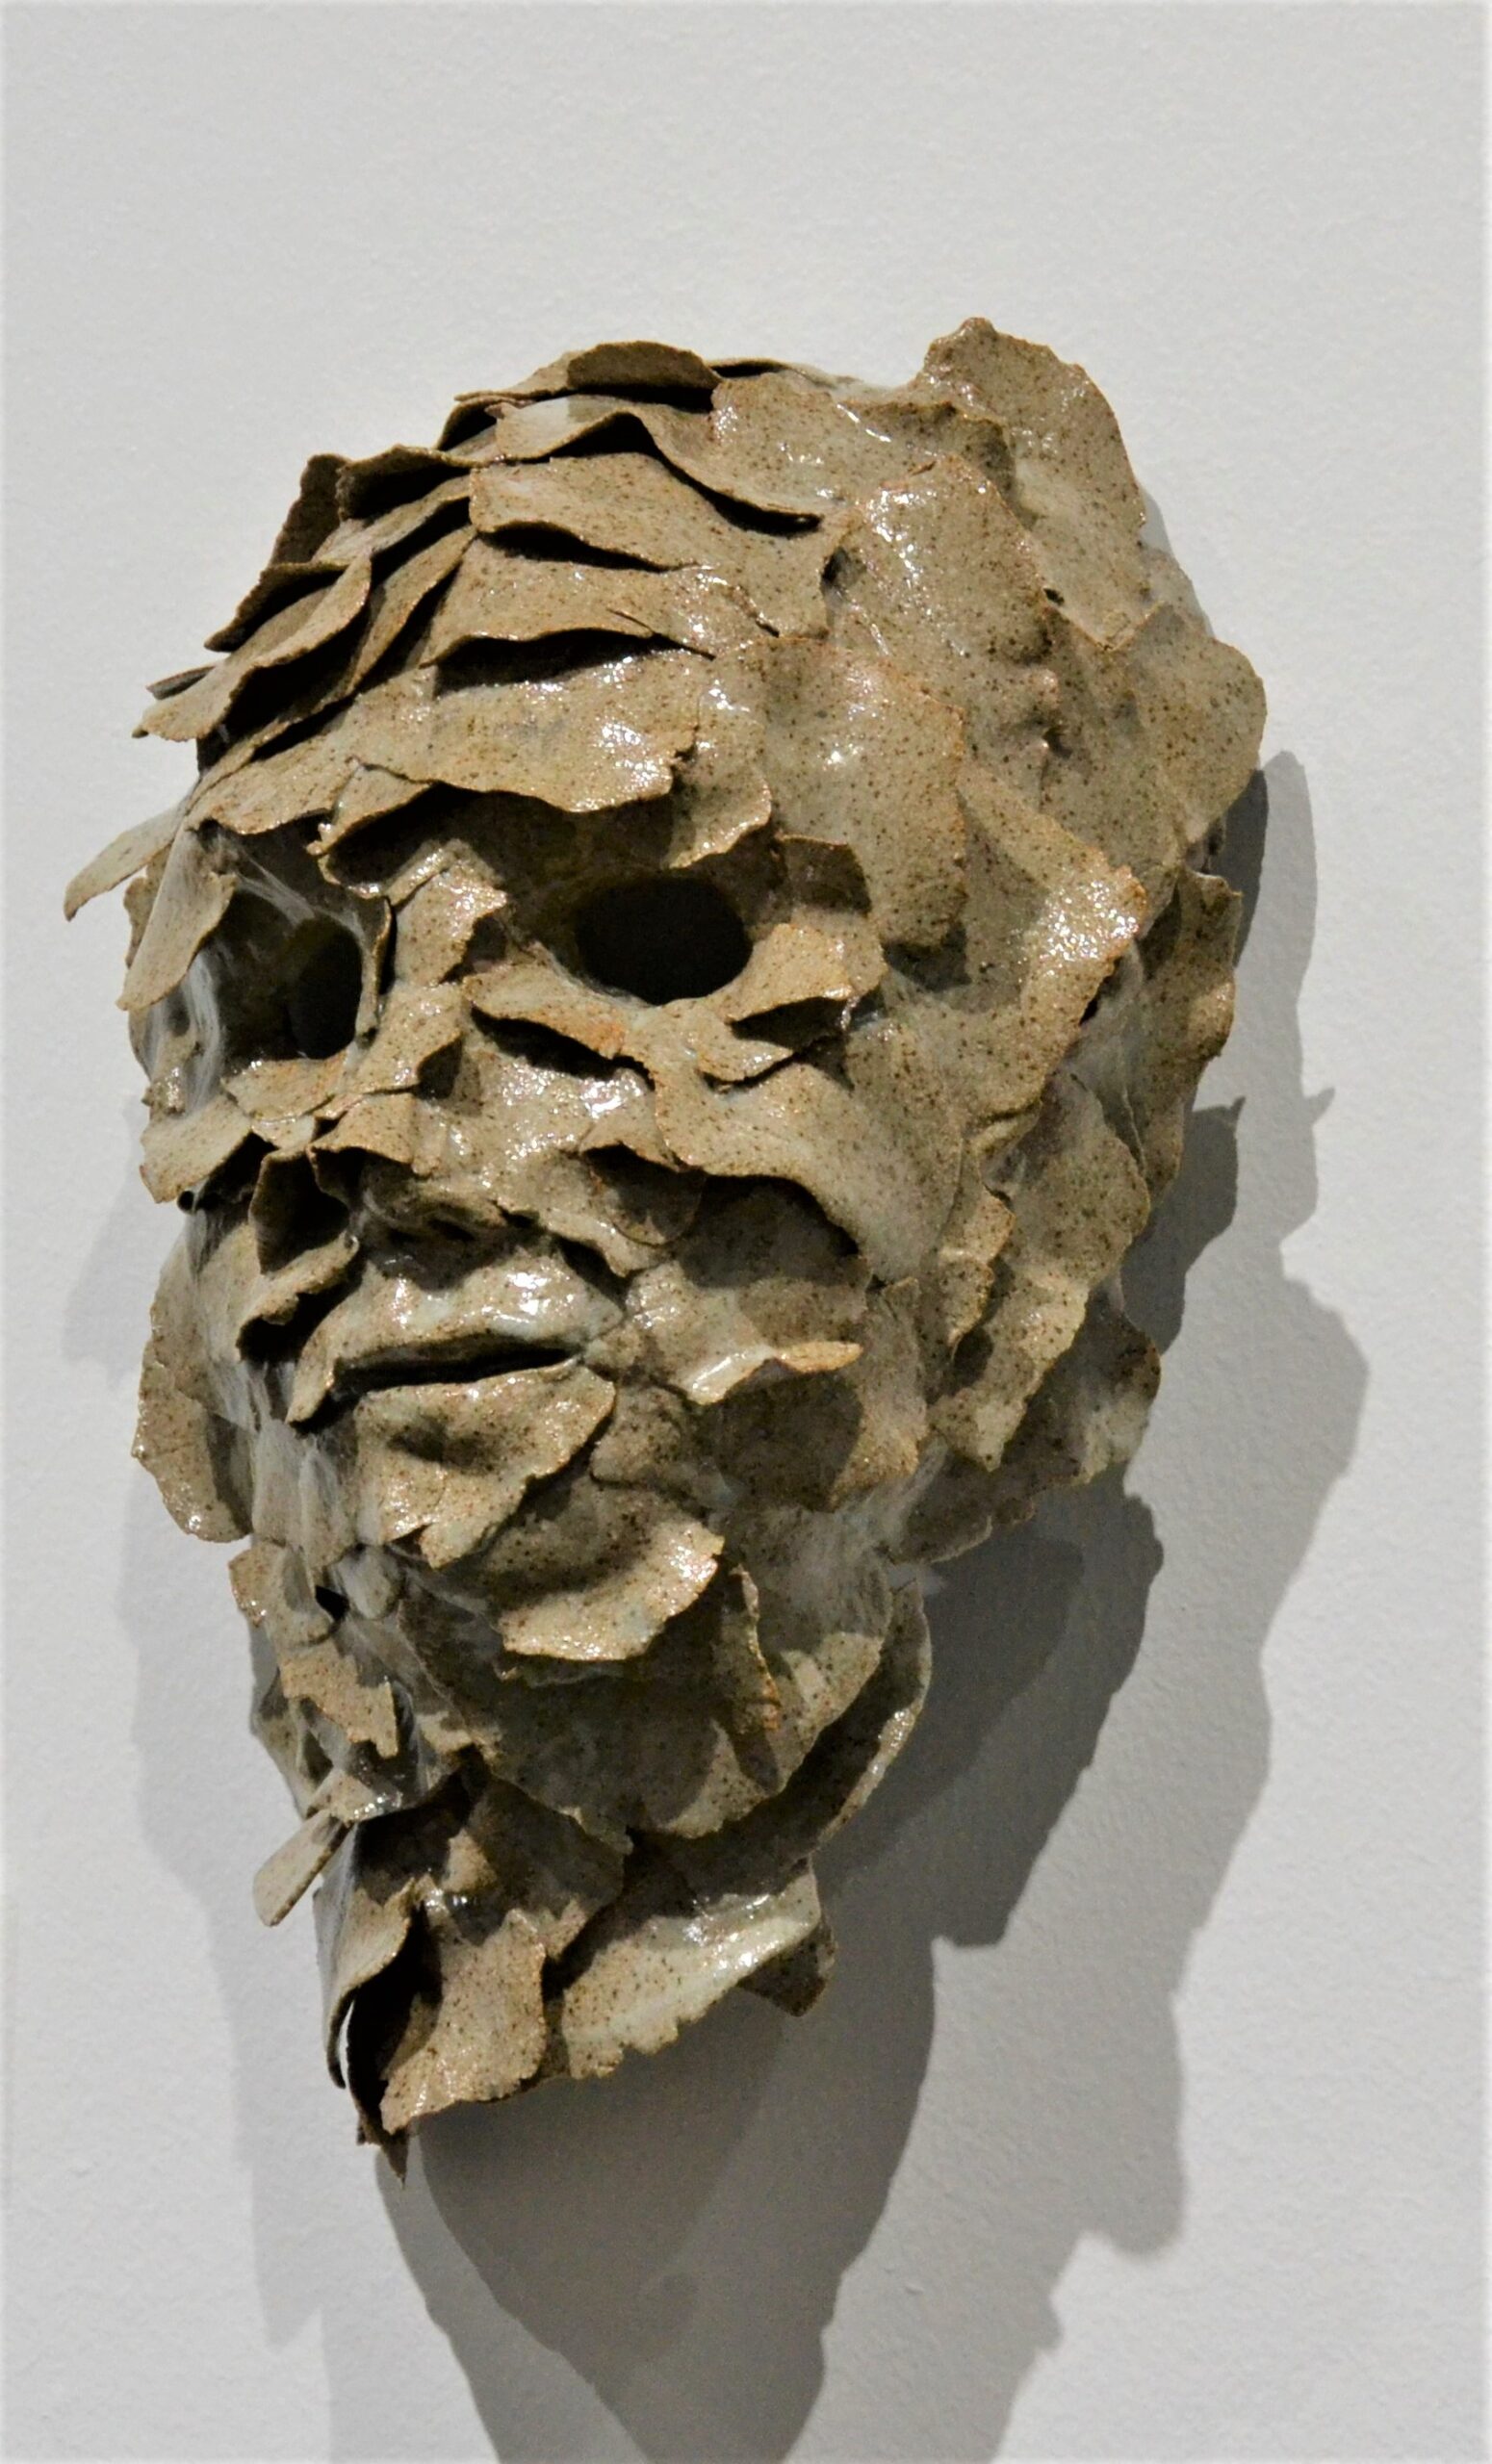 Ceramic art sculpture of a head and face full of layers that look like scales